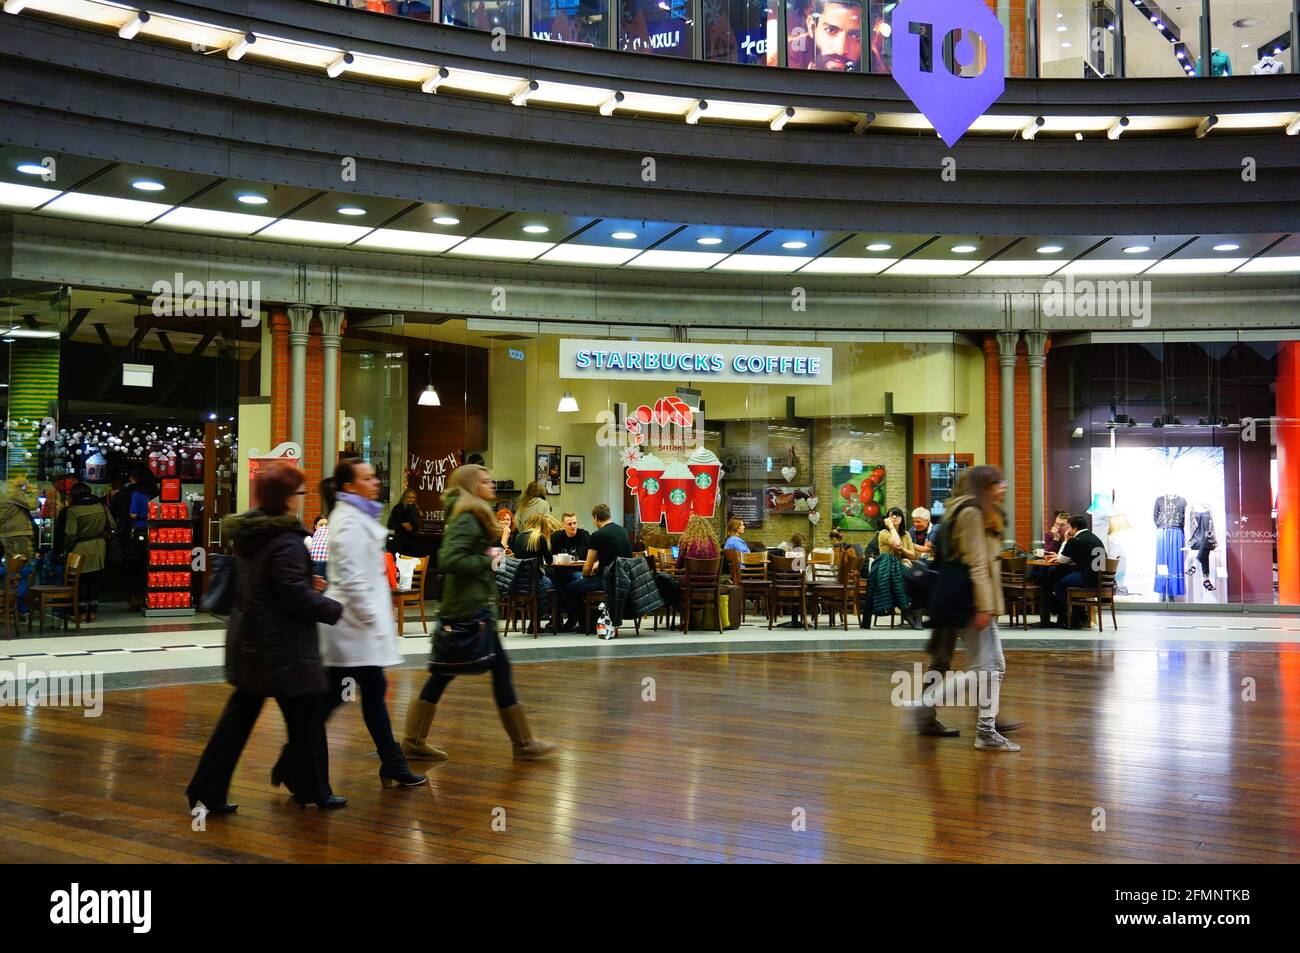 POZNAN, POLAND - Dec 01, 2013: Walking people in the Stary Browar shopping mall. Stock Photo